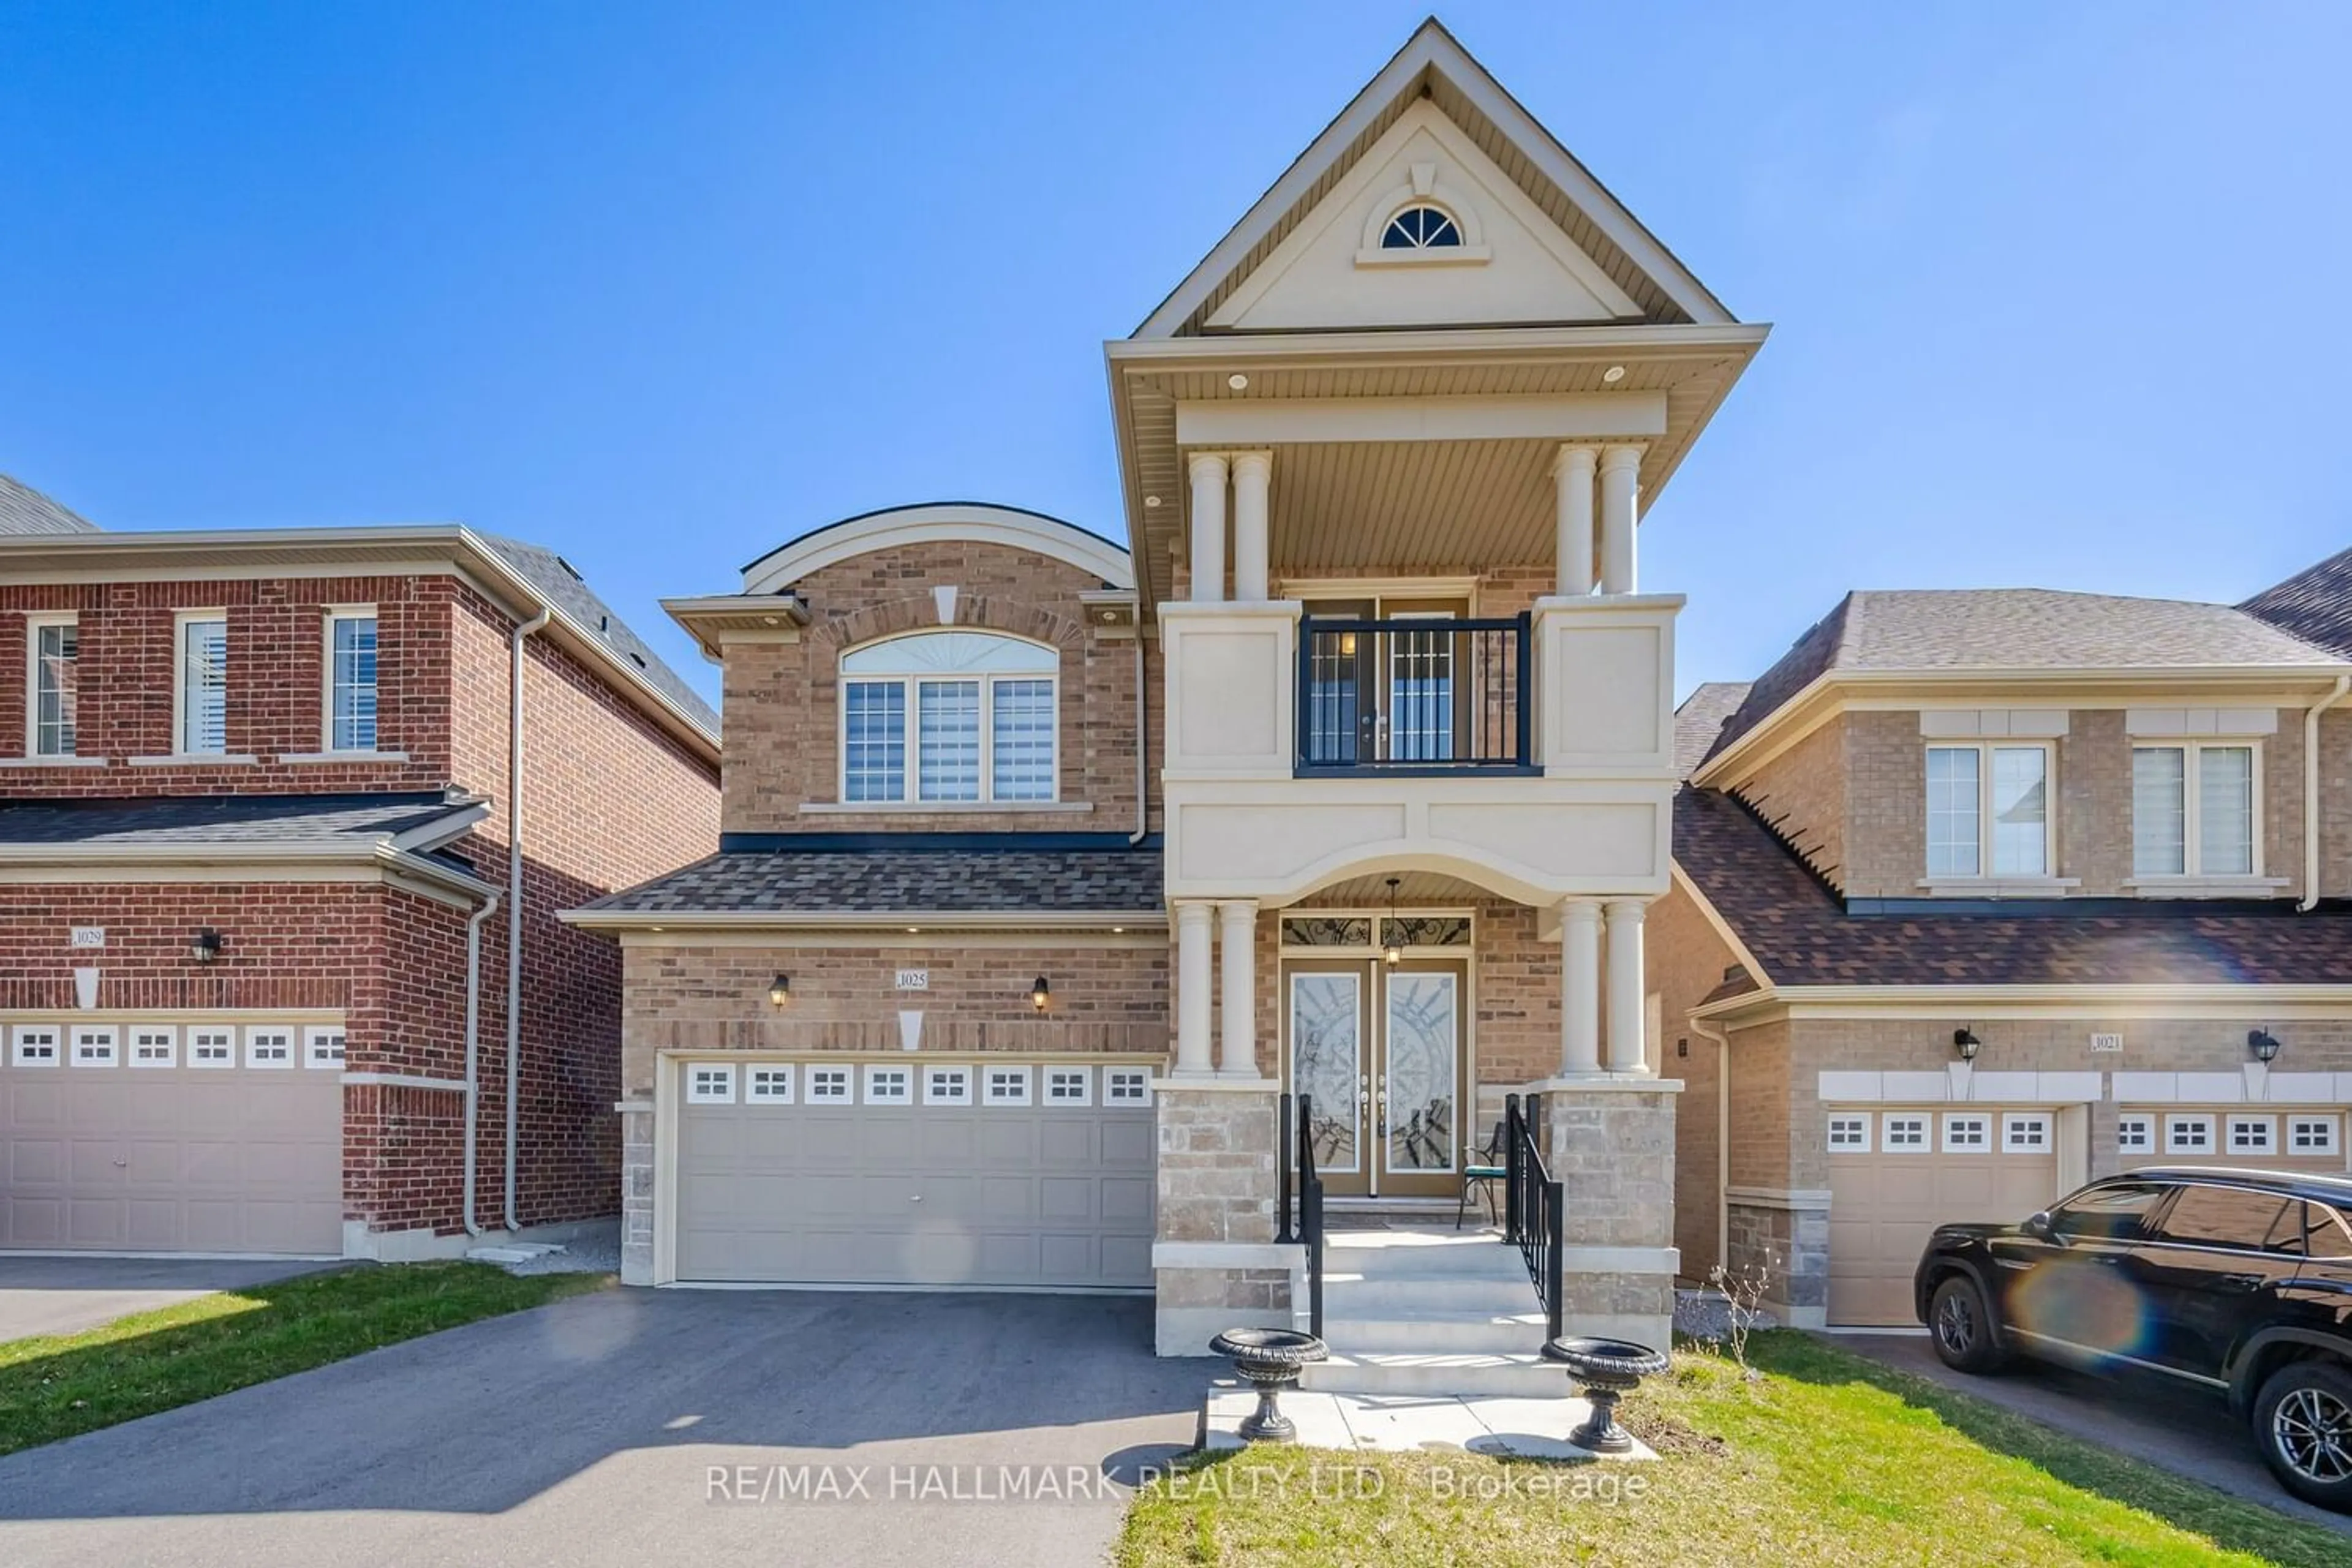 Home with brick exterior material for 1025 Langford Blvd, Bradford West Gwillimbury Ontario L3Z 4K9